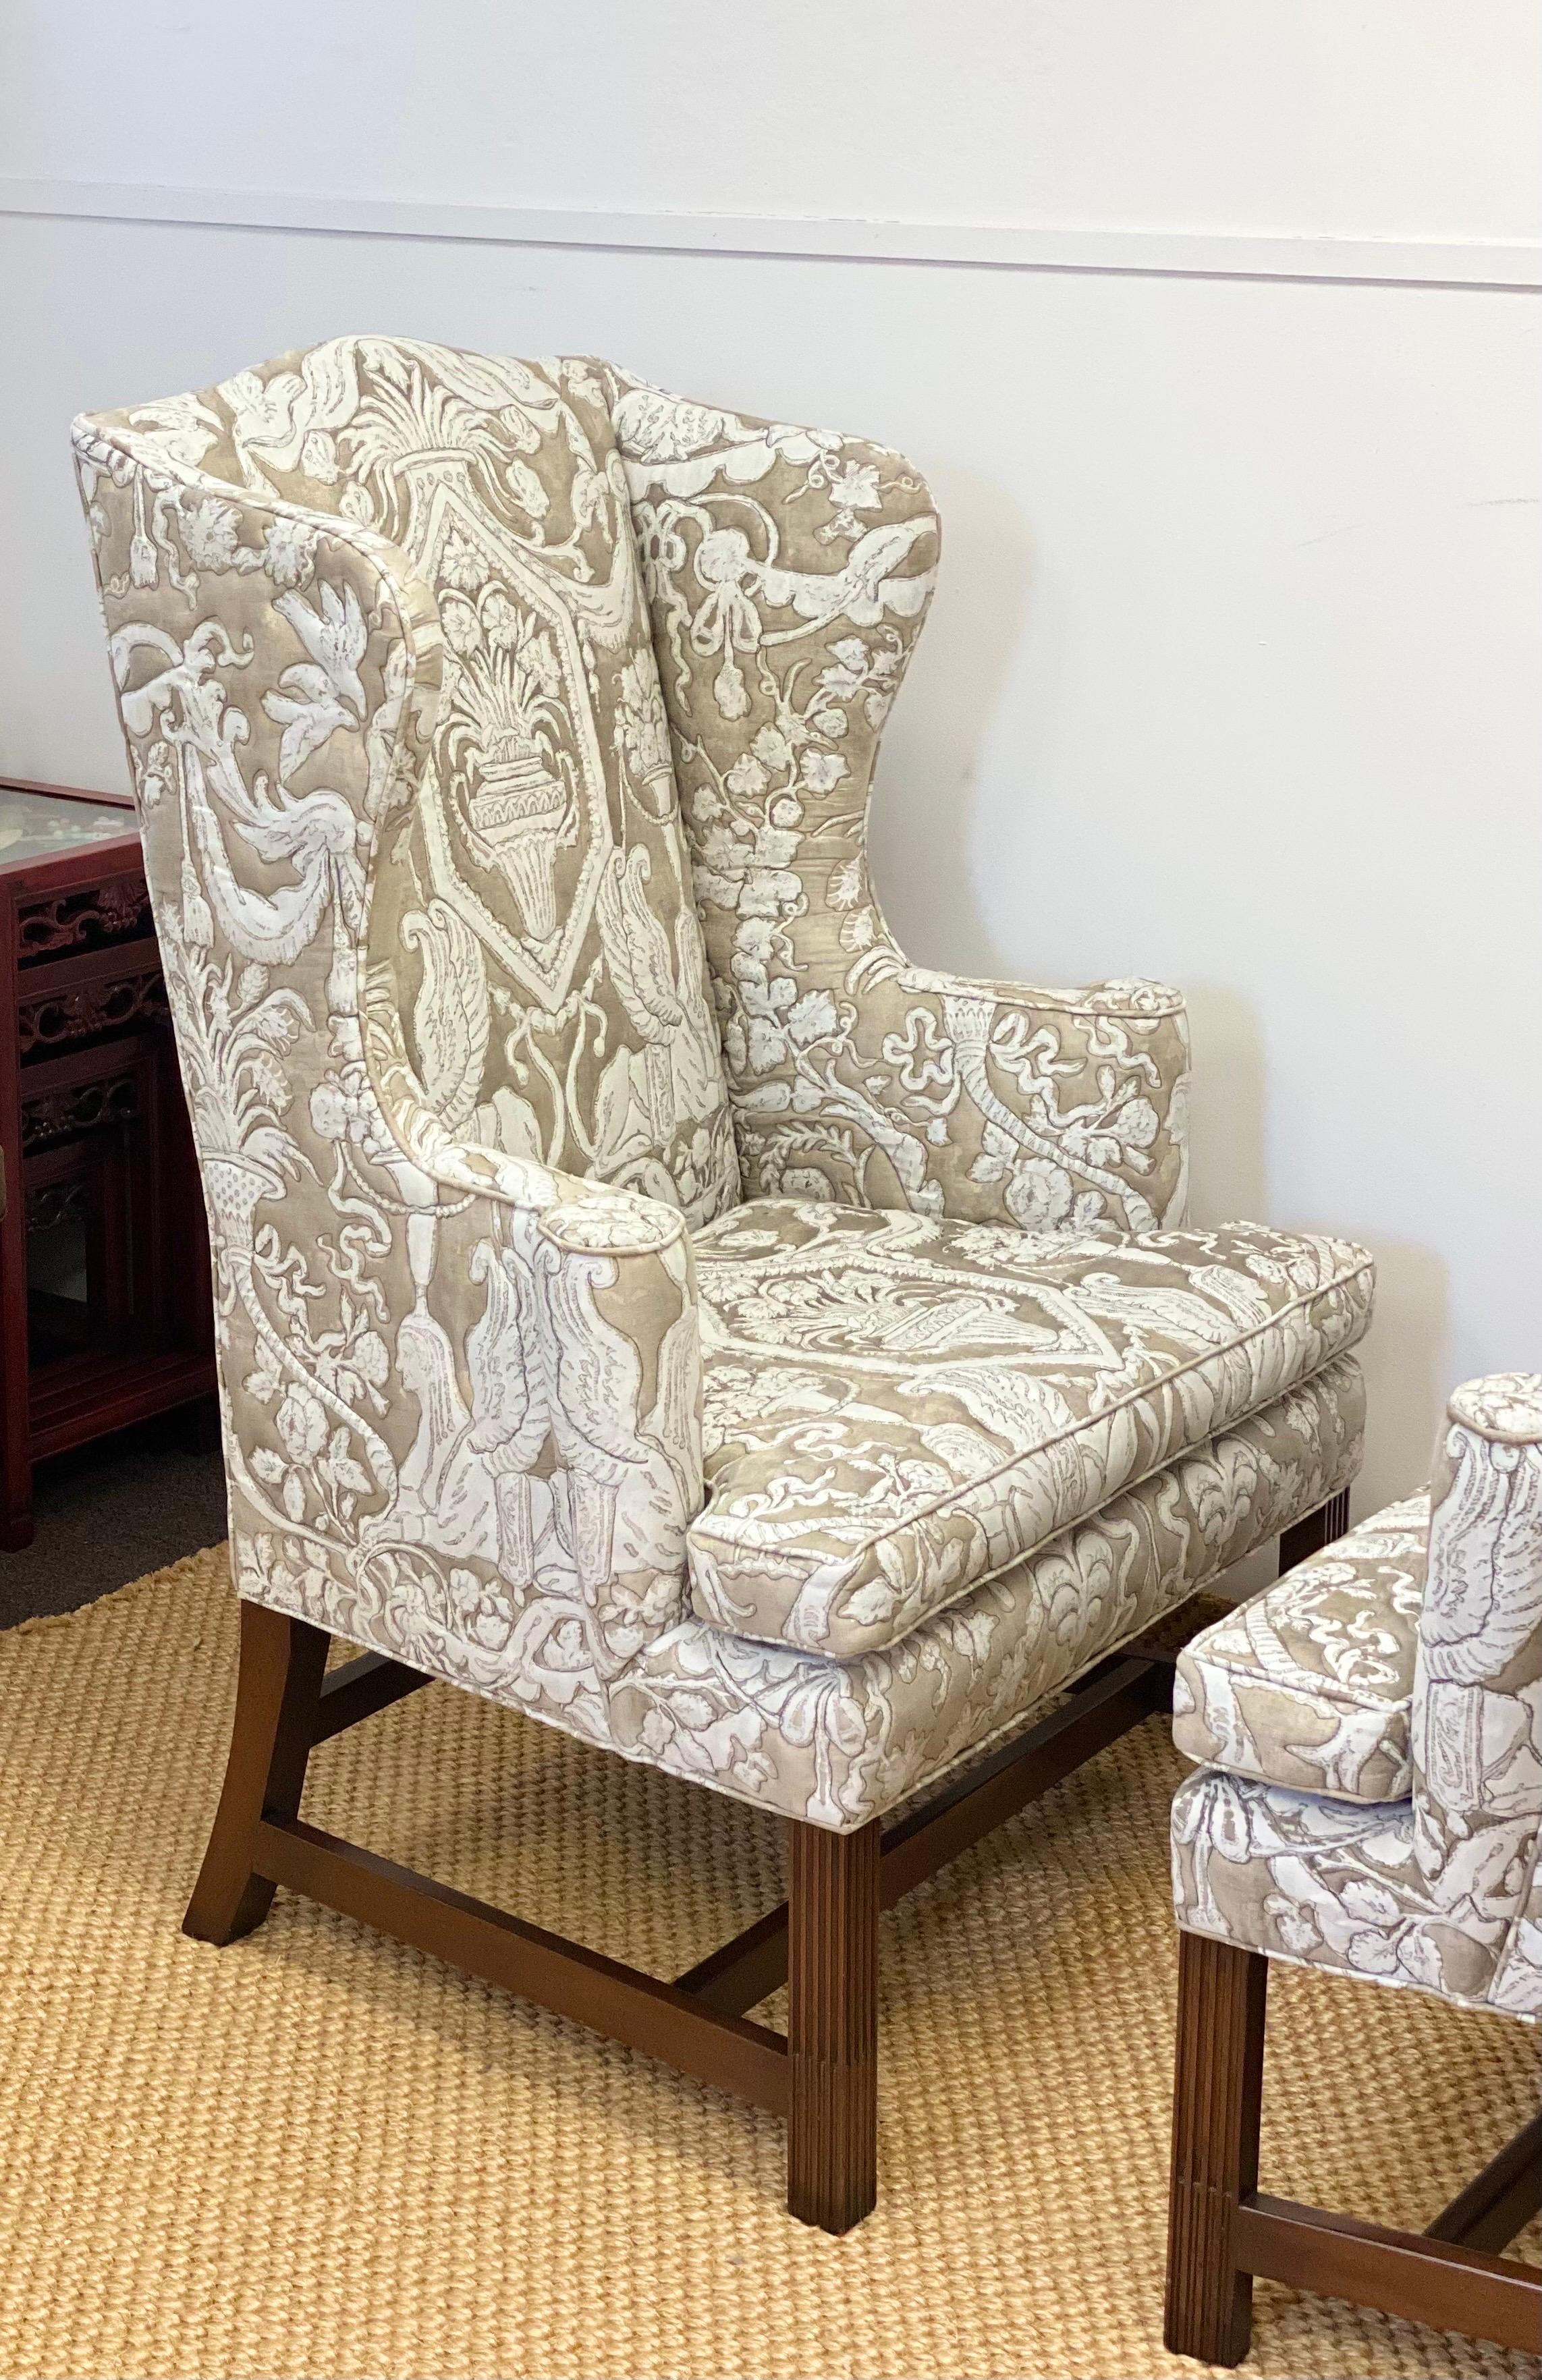 American 1960s Kittinger Cw12 Colonial Williamsburg Neoclassical Wingback Chairs – a Pair For Sale